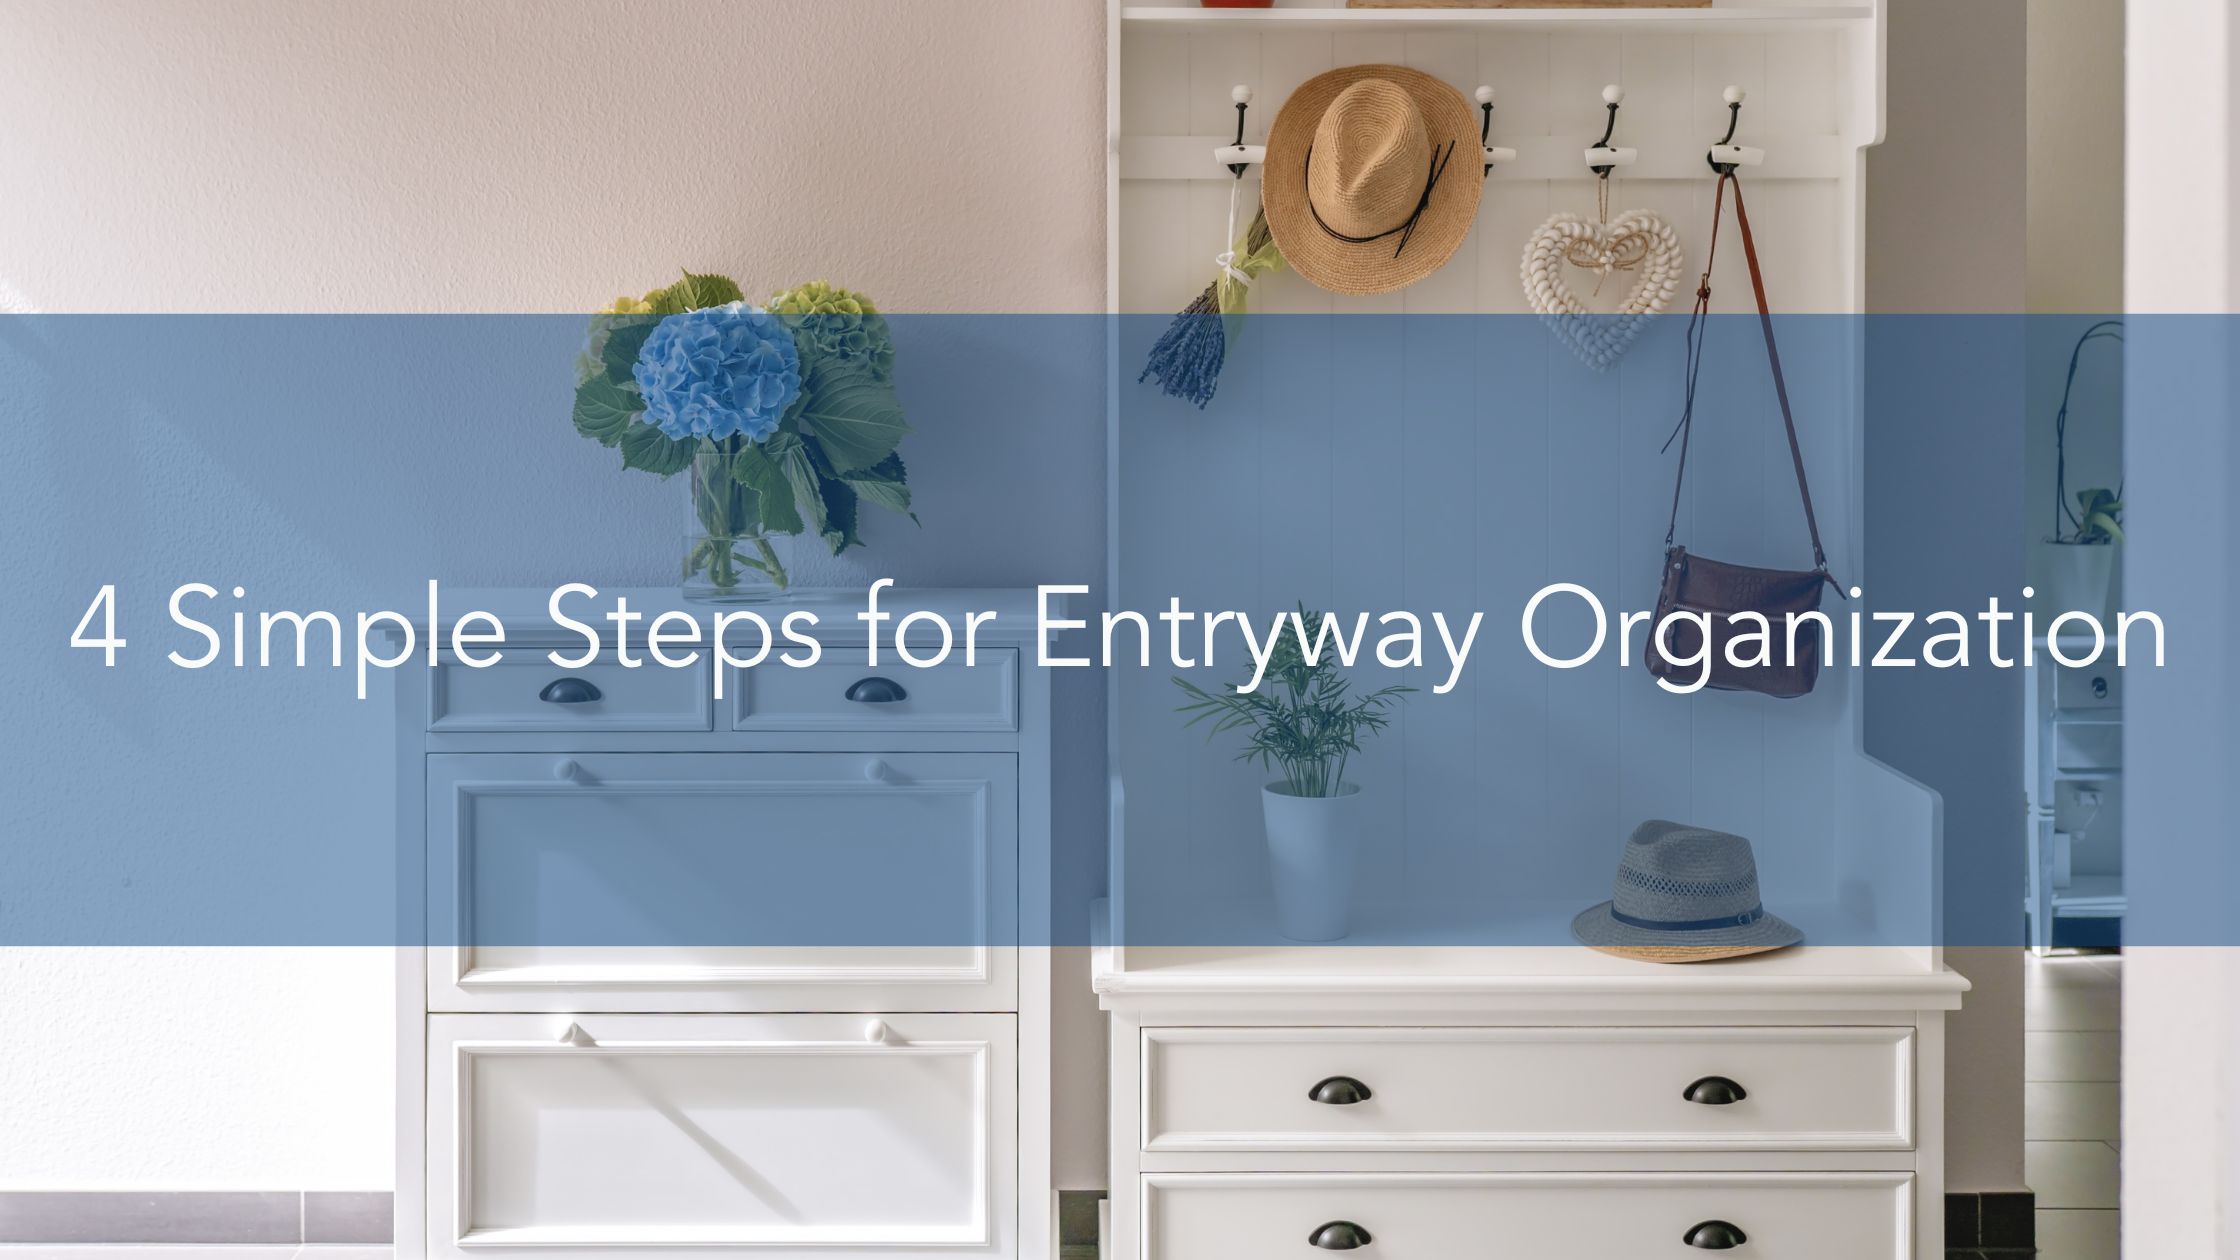 4 Simple Steps for Entryway Organization